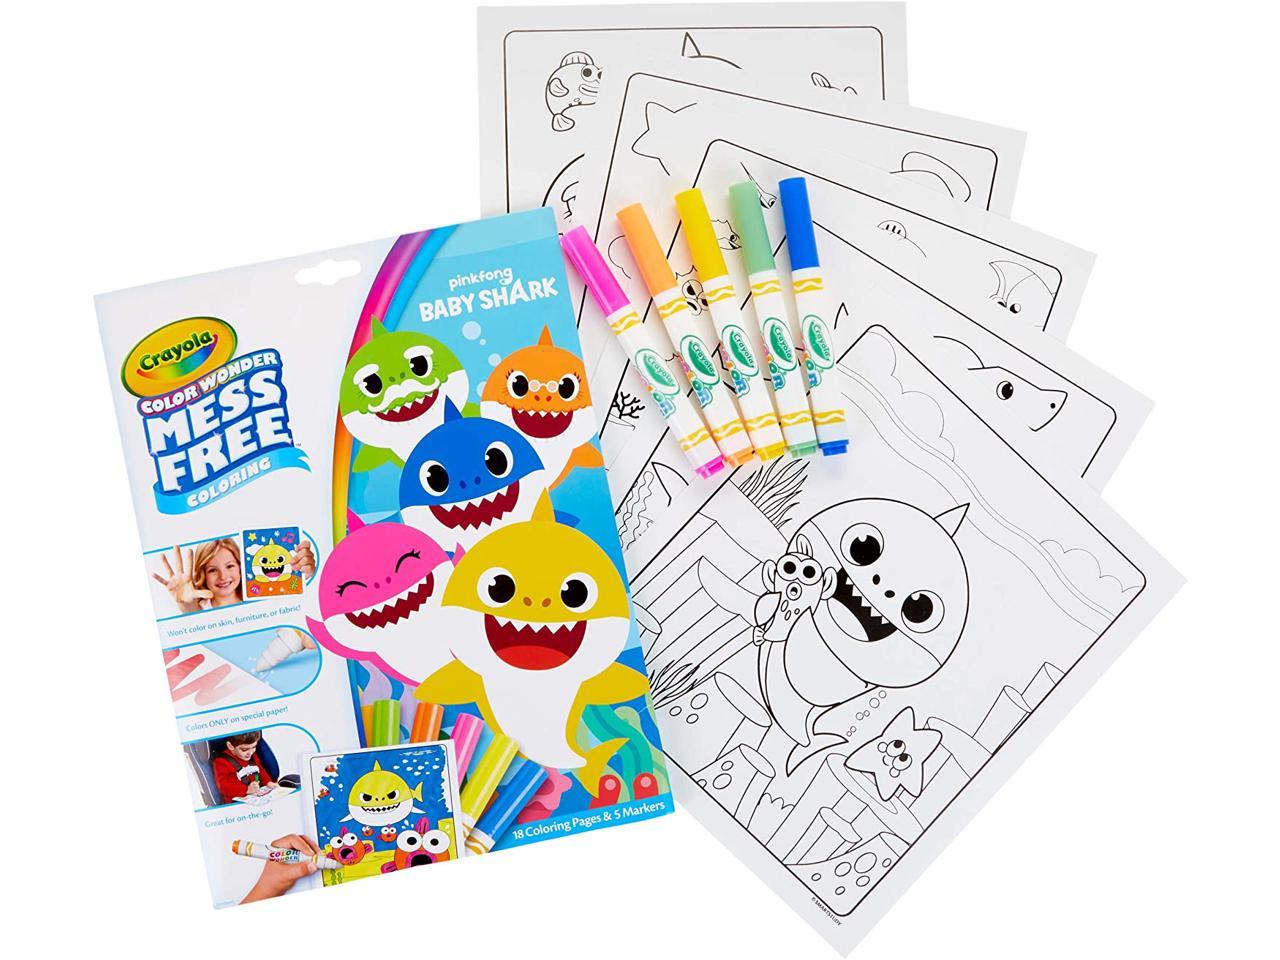 Download Crayola Color Wonder Baby Shark Coloring Pages, Mess Free Coloring, Gift for Kids, Age 3, 4, 5 ...